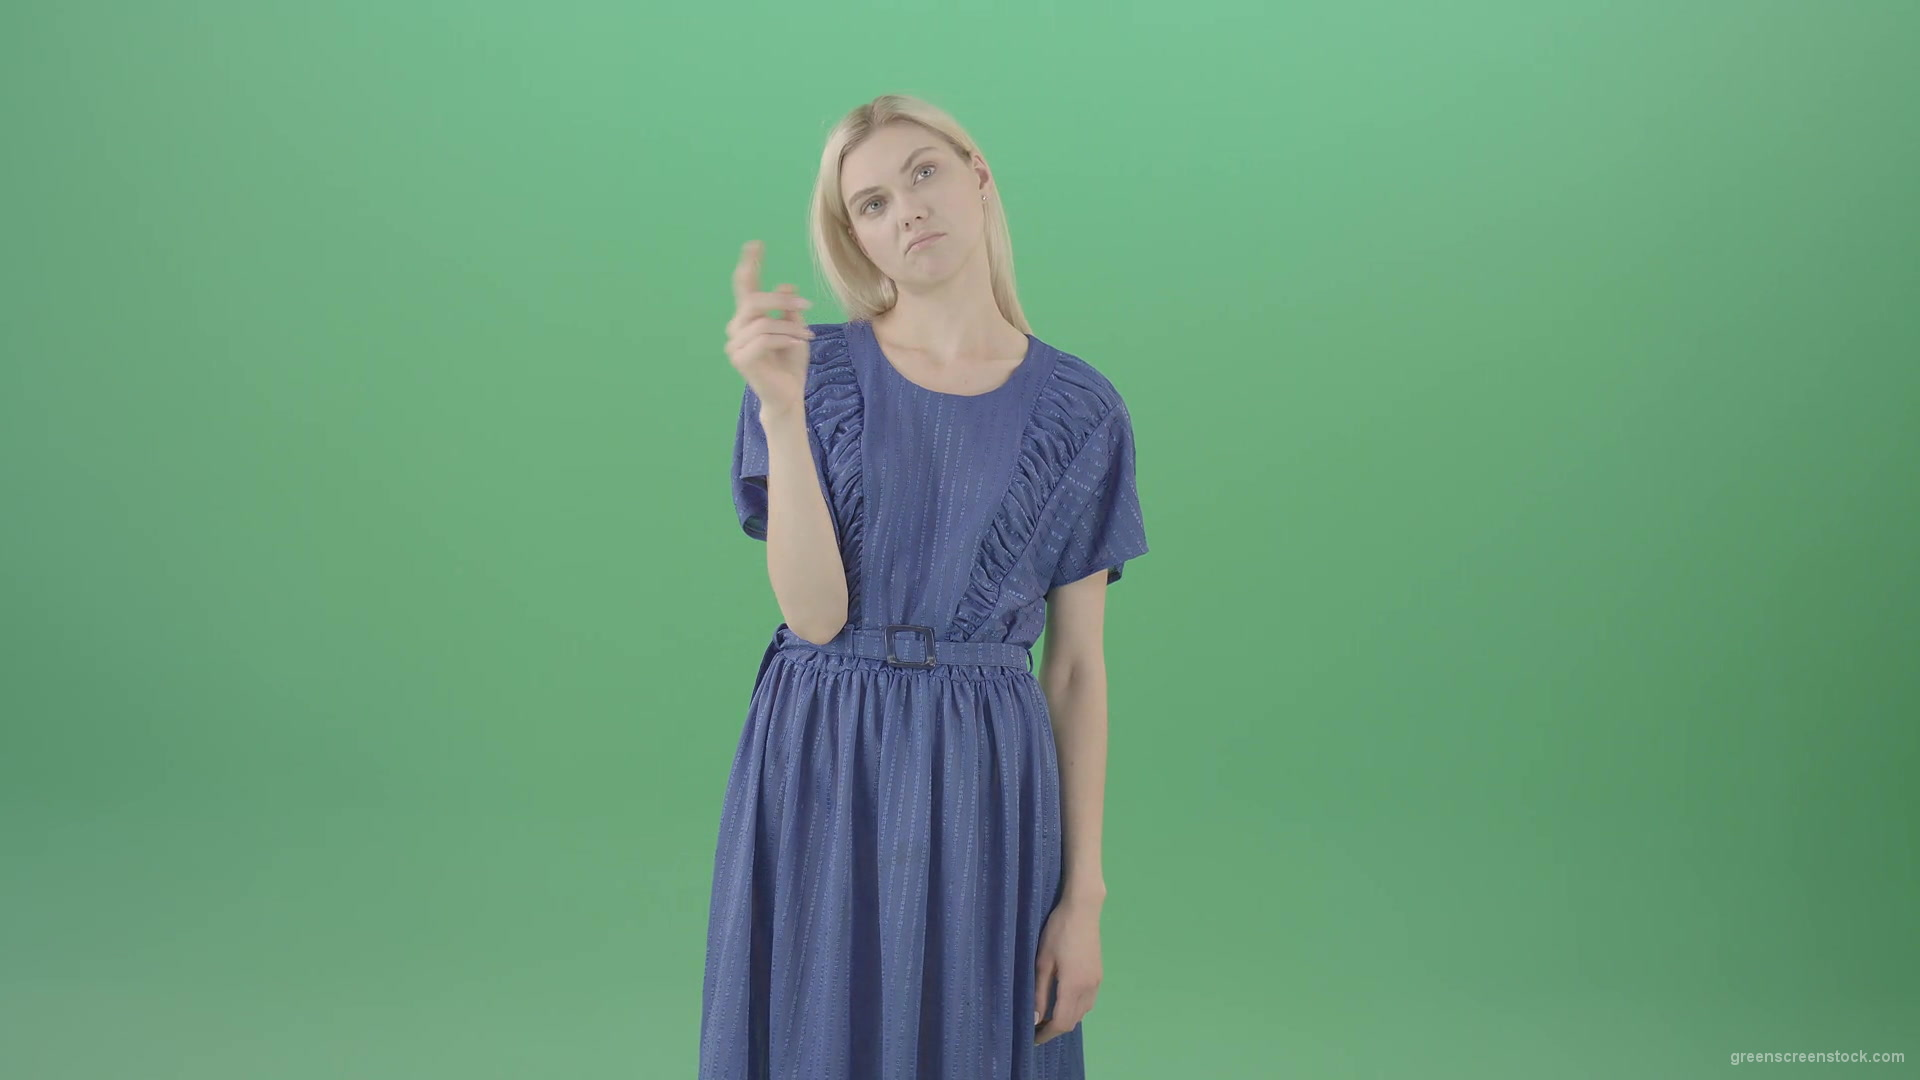 Boring-blonde-girl-in-blue-costume-can-not-find-virtual-products-on-touch-screen-isolated-on-green-background-4K-Video-Footage--1920_004 Green Screen Stock